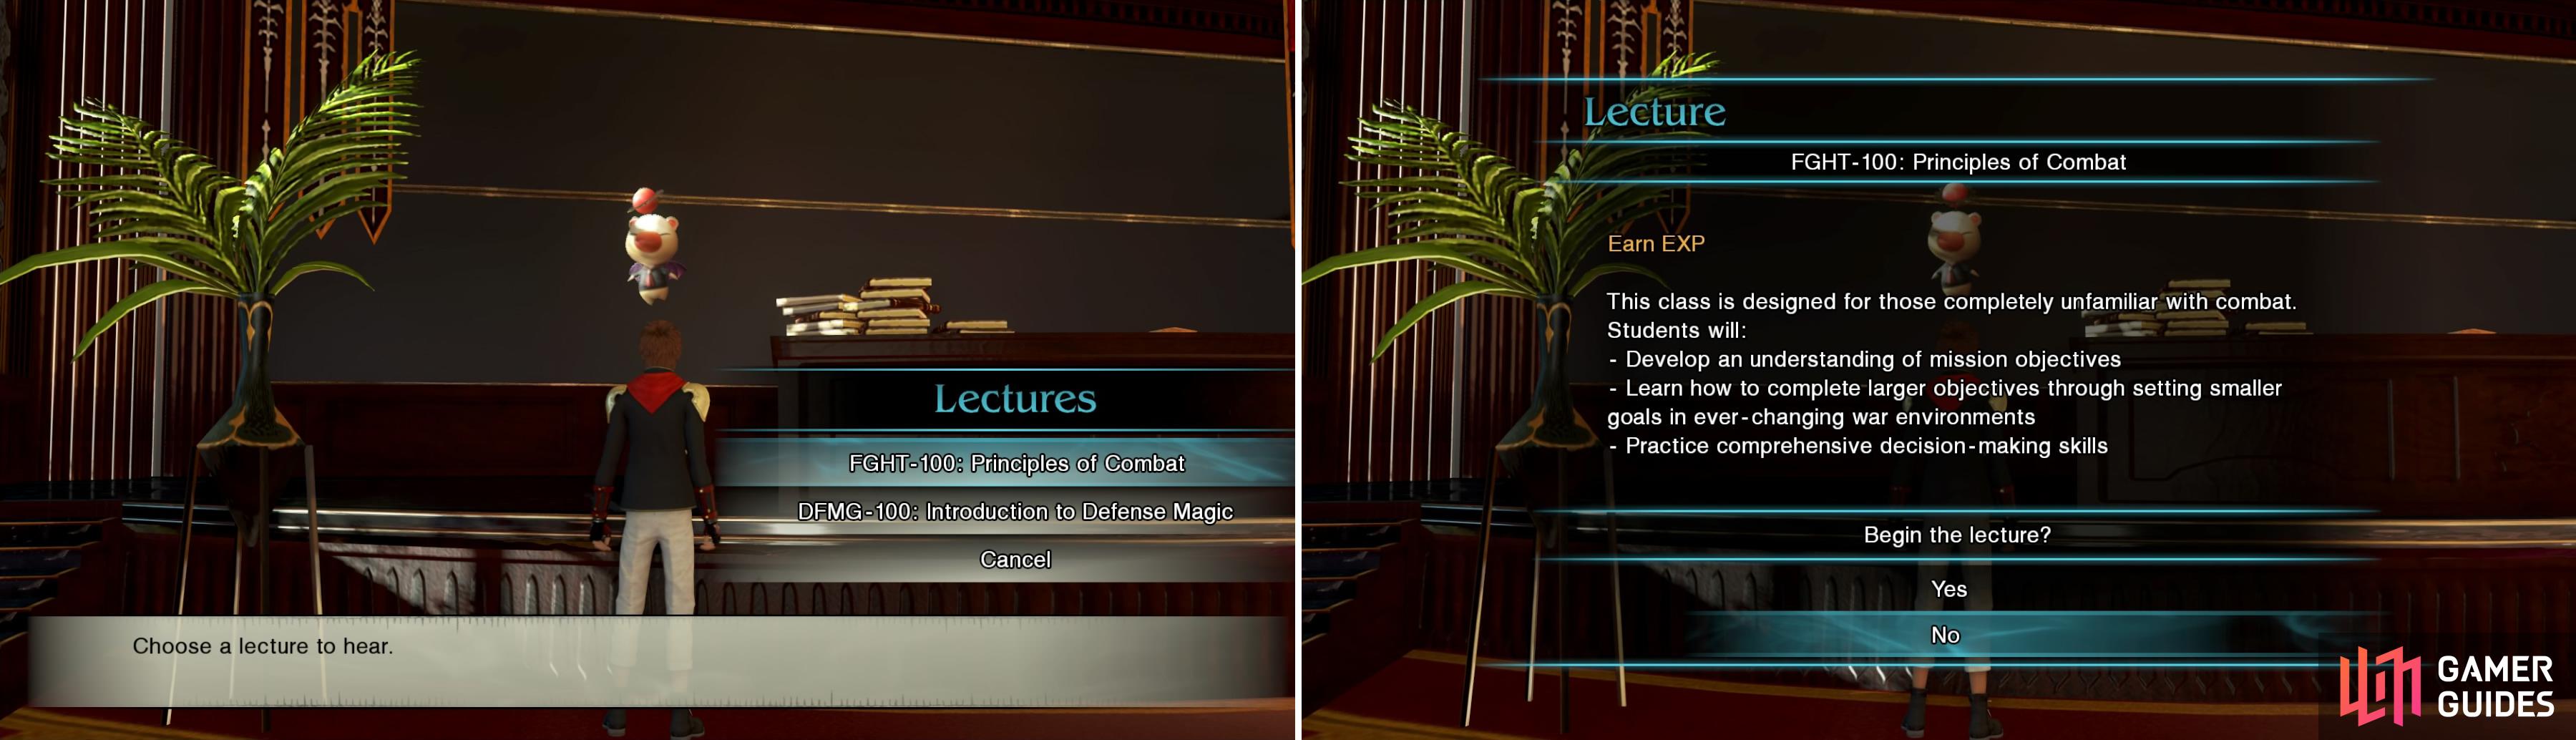 Moglin’s lectures should be a priority every time you have Free Time. You earn some great EXP and upgrades for completing them.